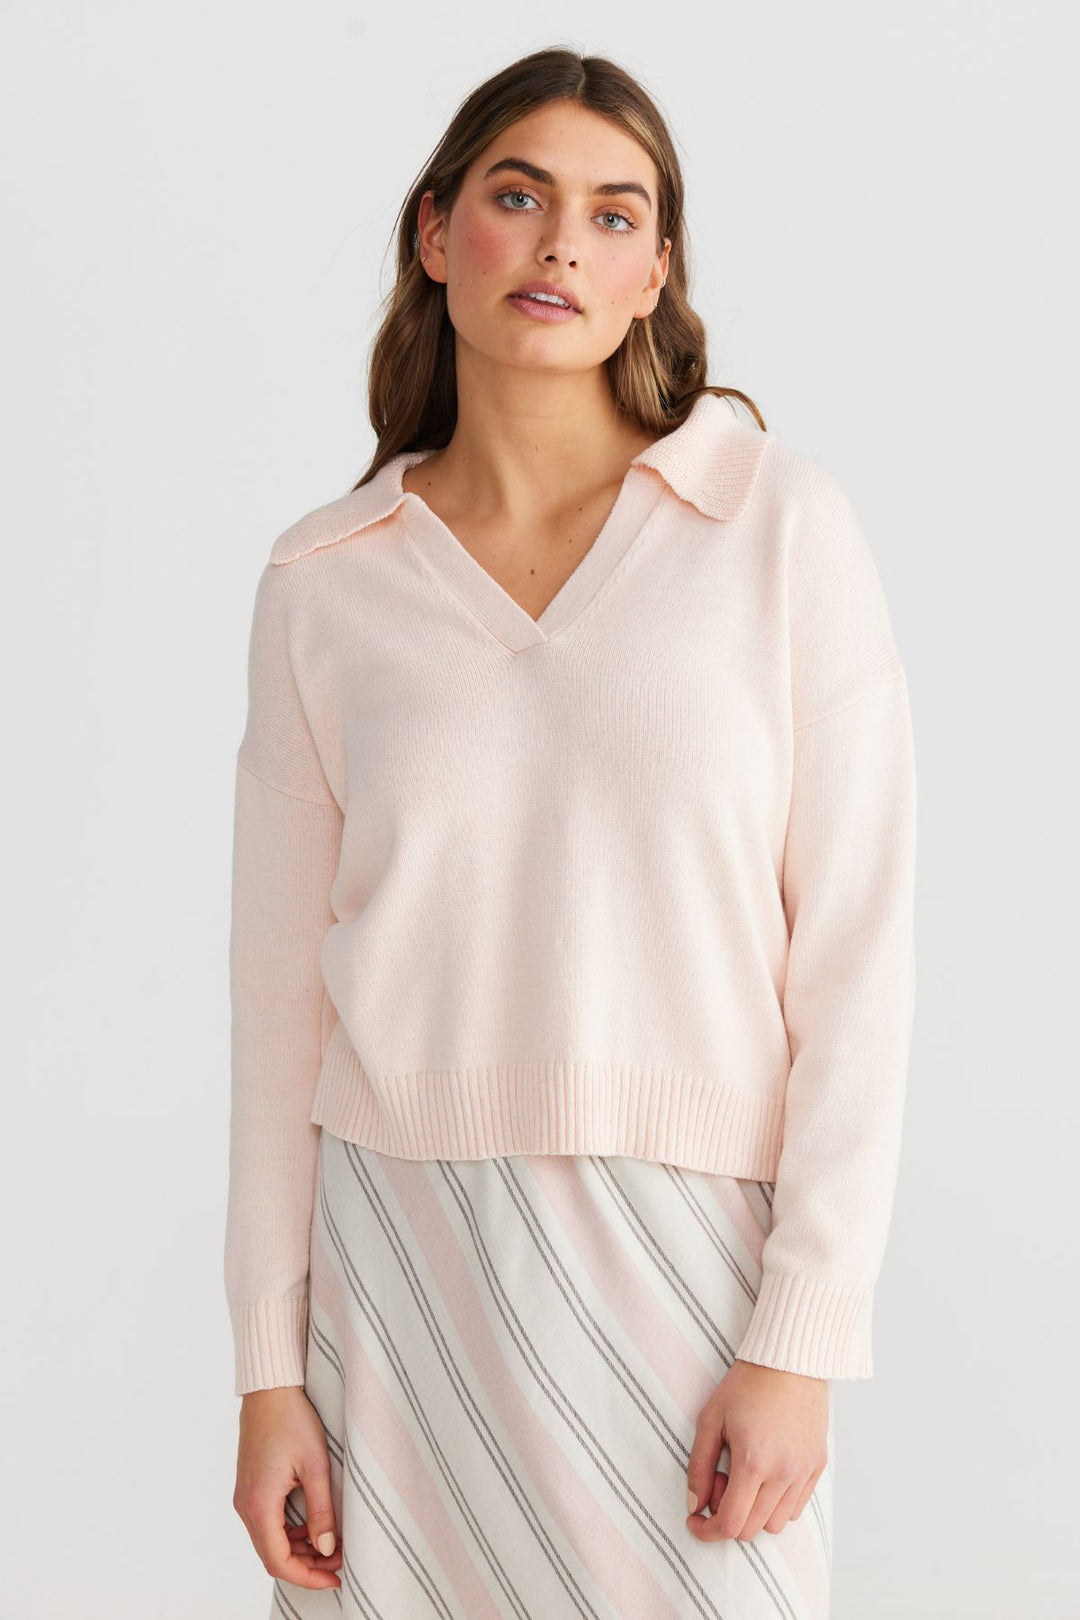 Crafted from a cotton blend fabrication, the Tribeca Knit by The Shanty Corporation offers comfort and style to your Winter wardrobe. Featuring a v-neck style, with long sleeves, and loose fitting cuffs, this piece is a modern take on a wardrobe staple.   Brand : The Shanty Corporation Style Code : SH23074-1 Colour : Pale Pink Fabric : 60% Cotton 40% Acrylic Cold hand wash Relaxed Fit Straight sleeve V-neckline Rib collar, detailing at cuff and hem